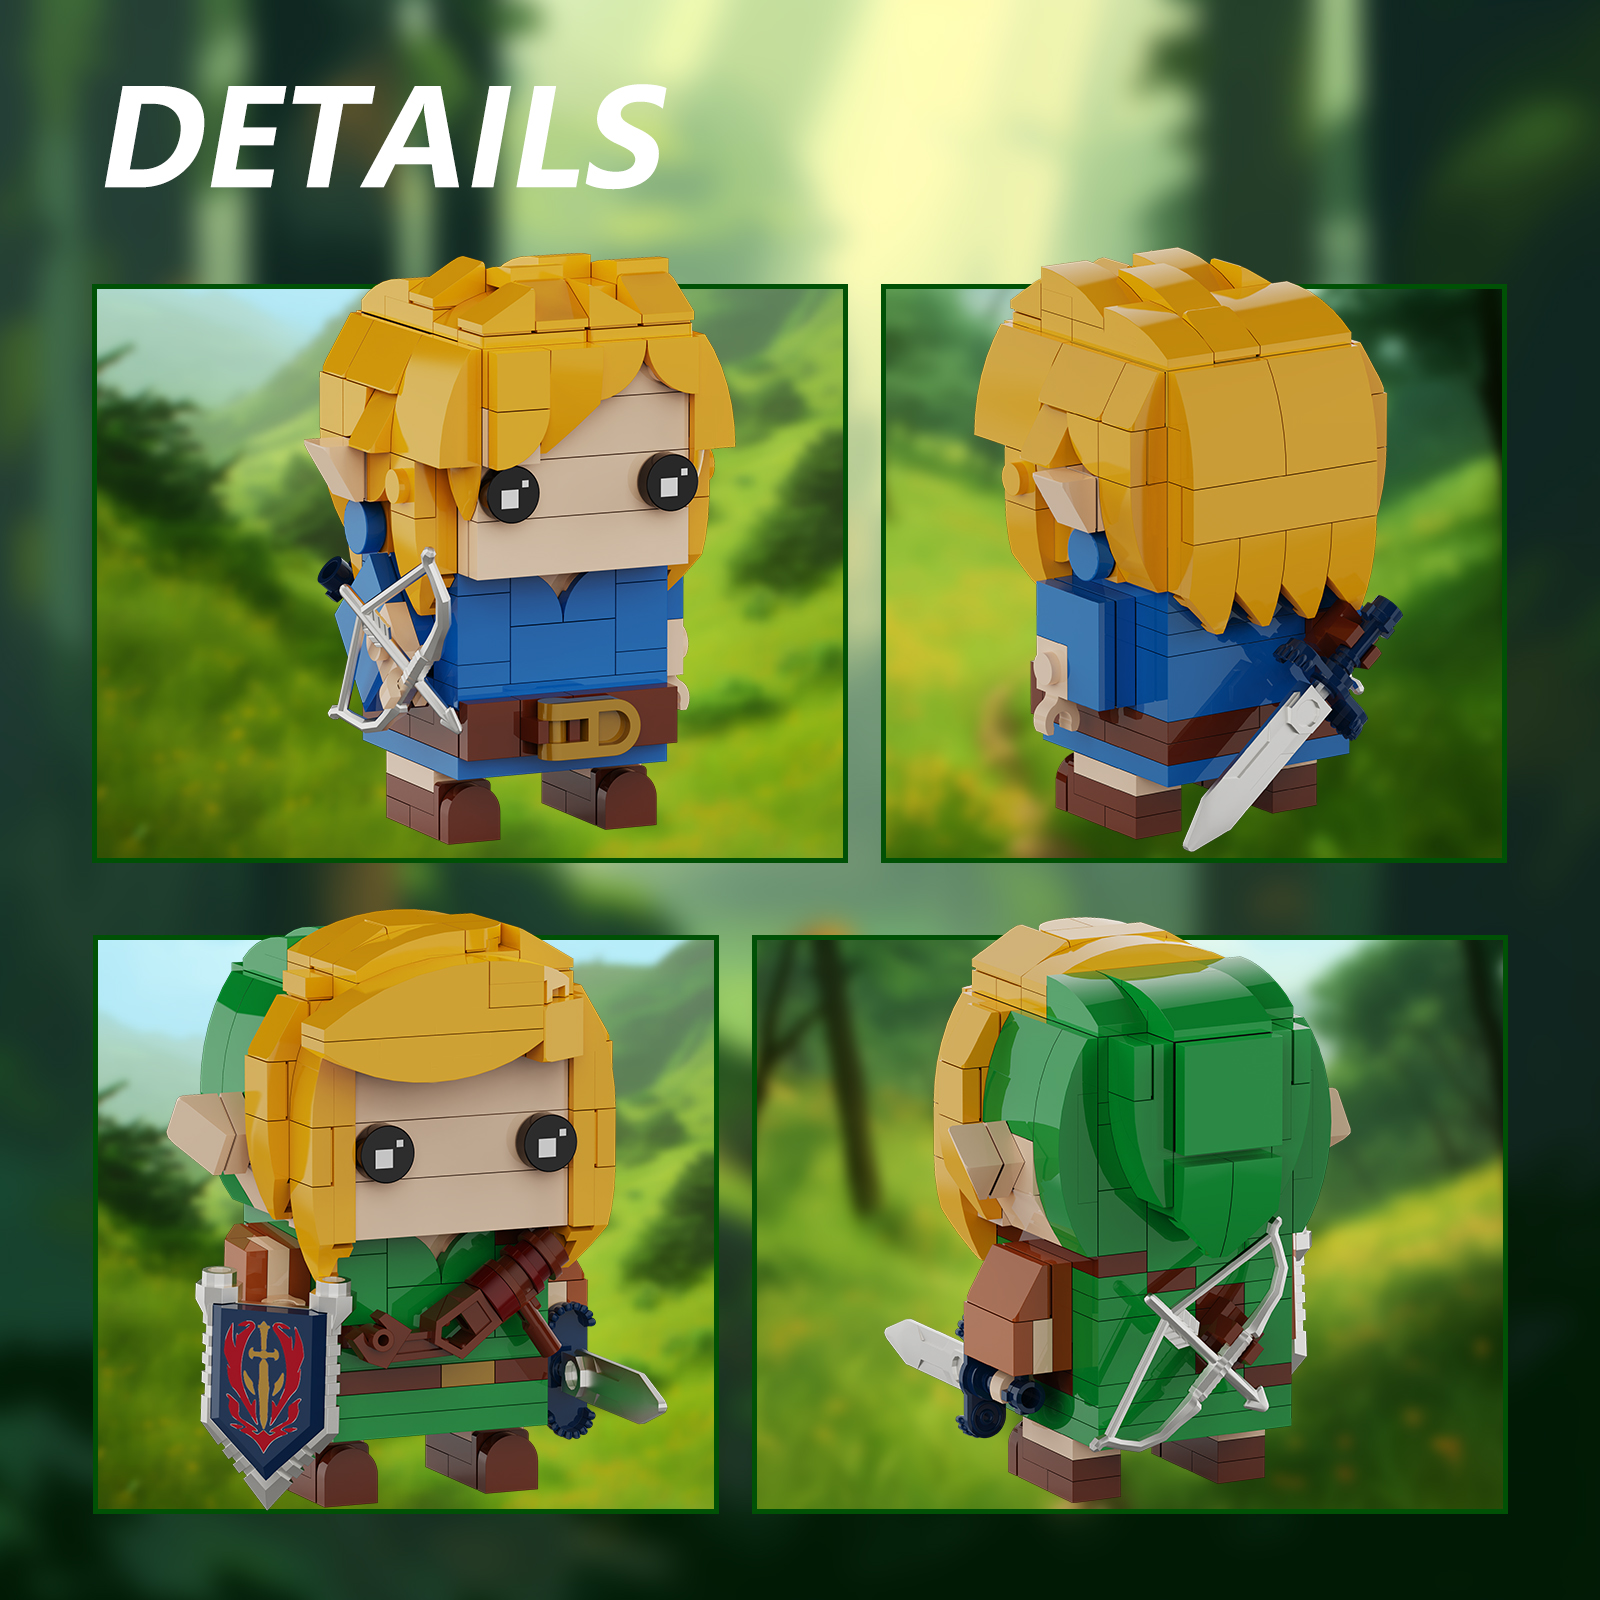 BuildMoc Breath Of The Wild Brickheadz Link Building Block Set For Zeldaed Character Collection Toys For 4 - Zelda Plush